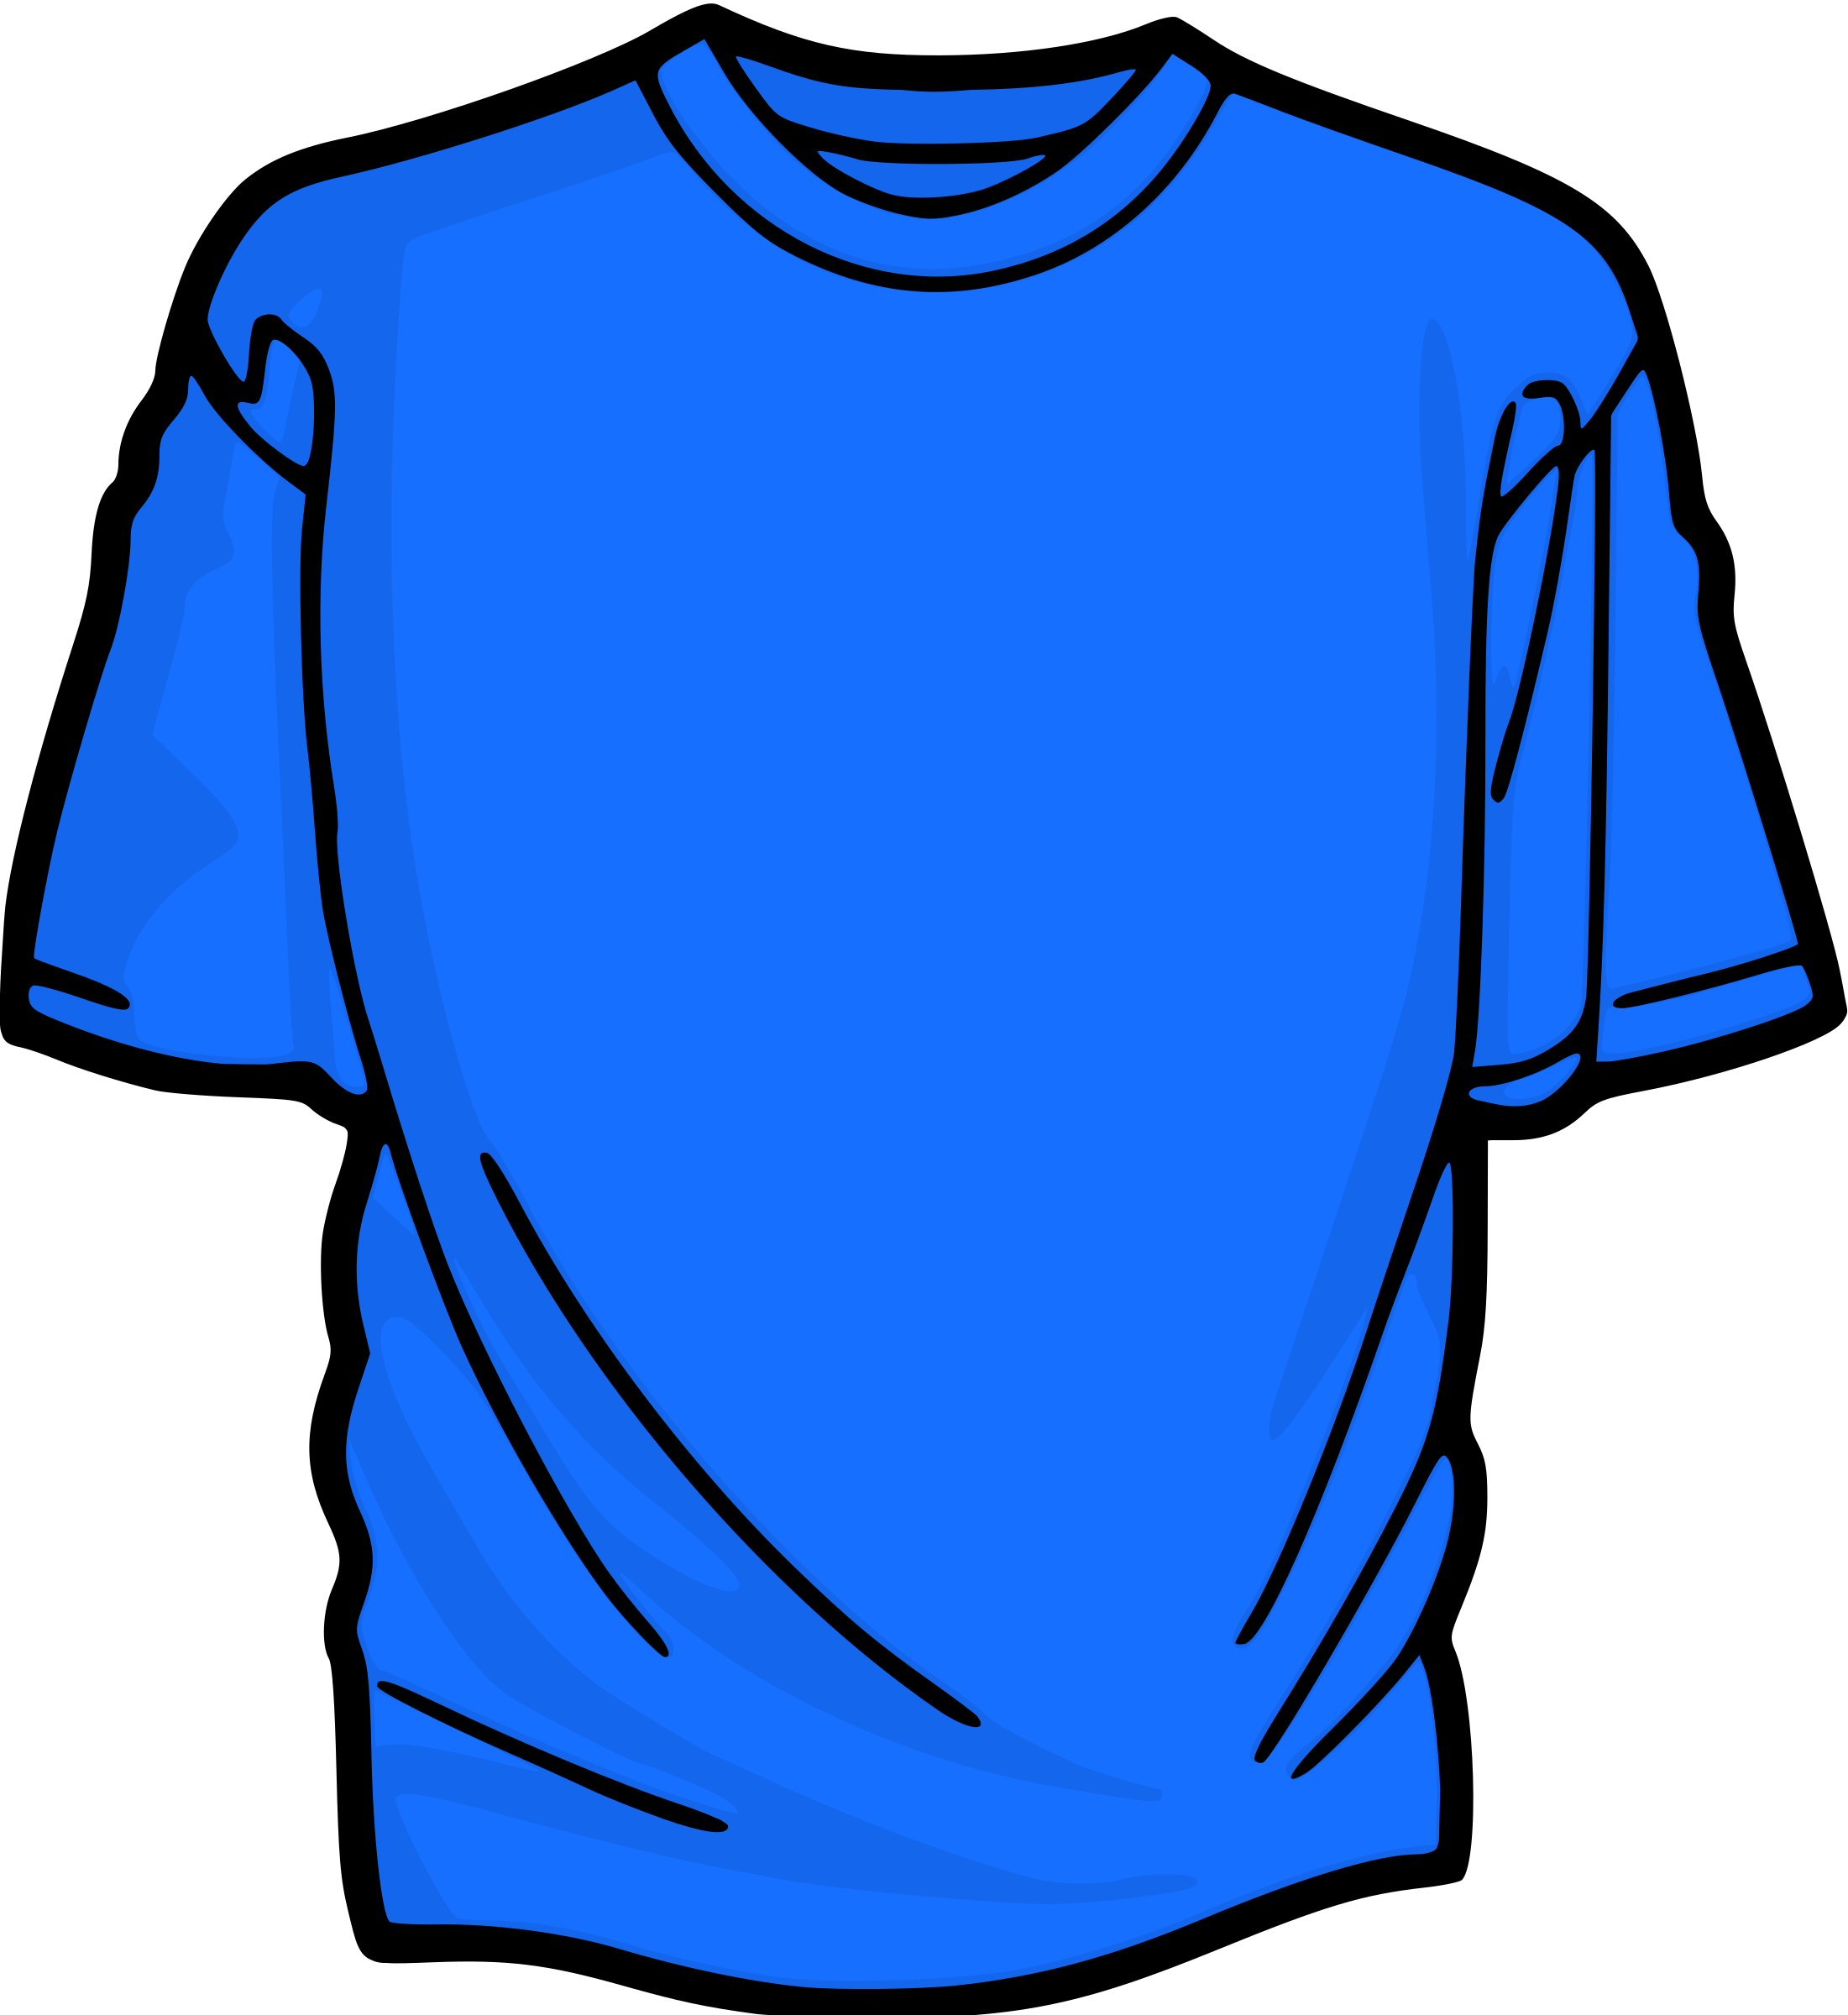 Shirts clipart different color, Shirts different color